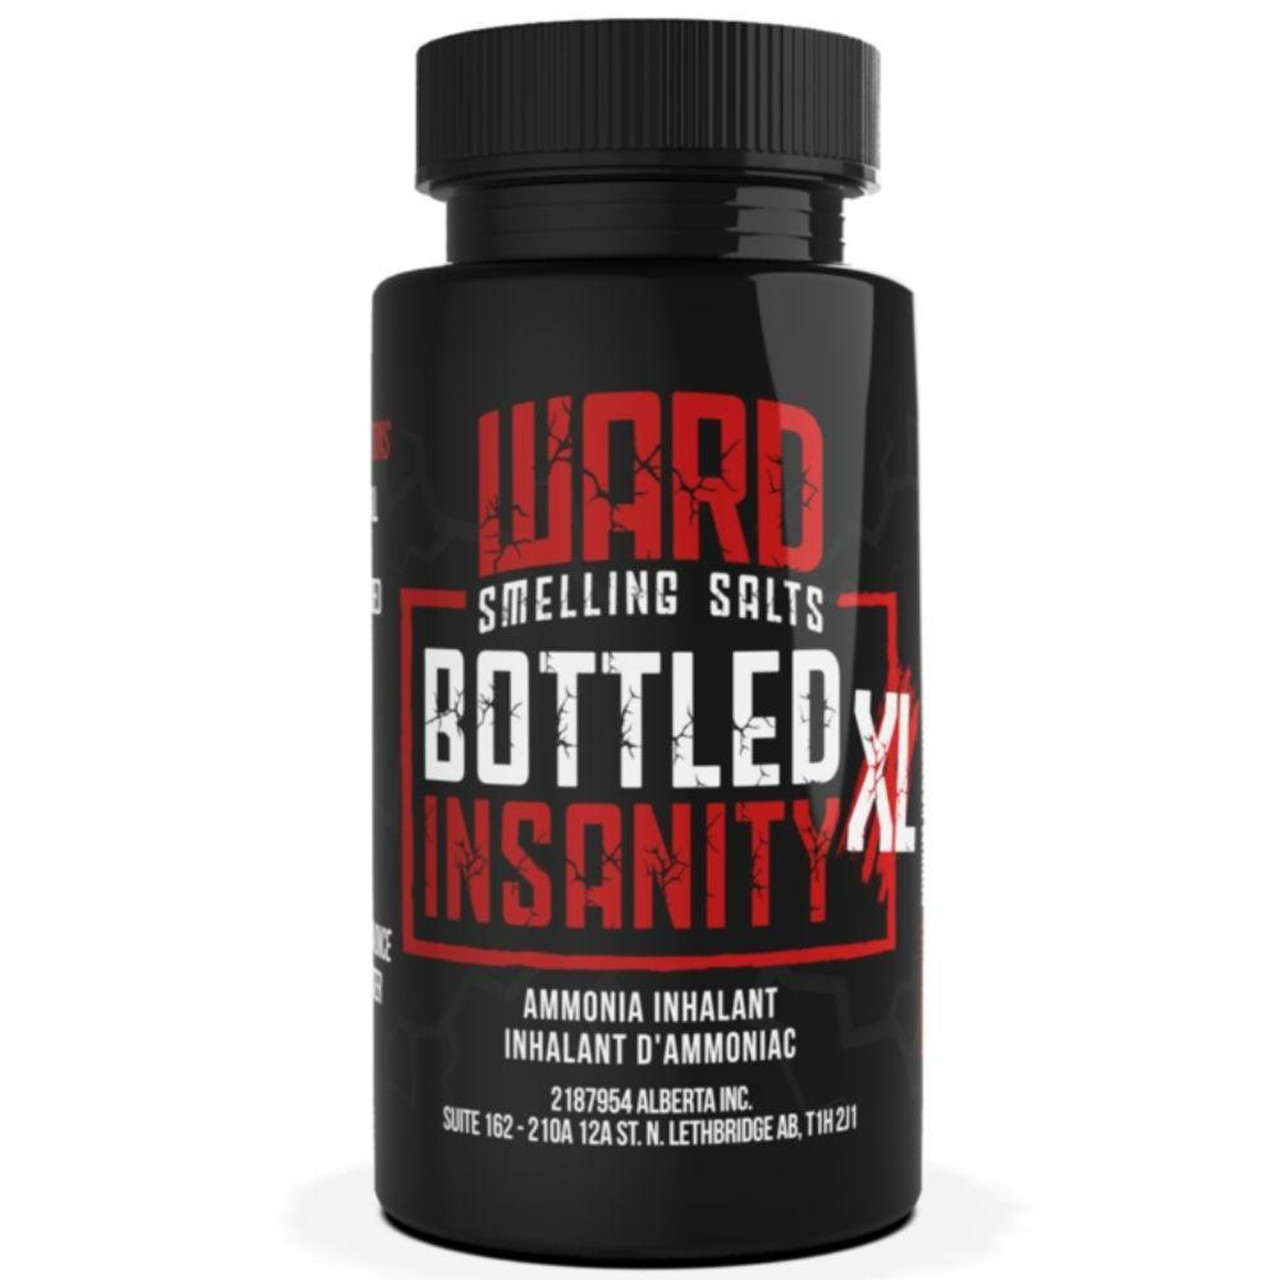 Strongest Ammonia Smelling Salts for Lifting Ward Bottled Insanity